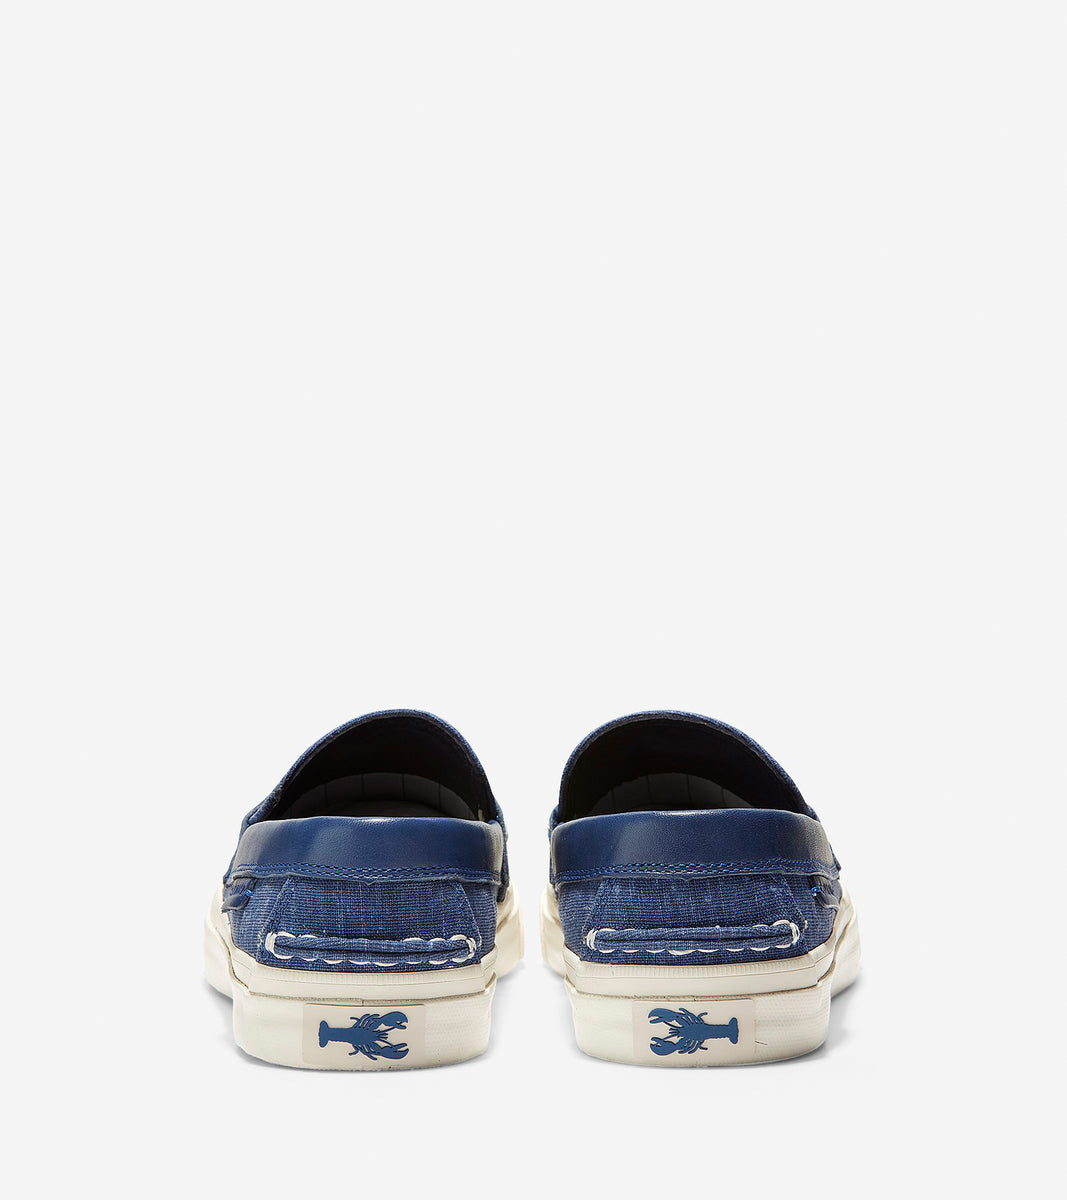 ColeHaan-Pinch Weekender LX Loafer-c27223-Navy Peony Canvas